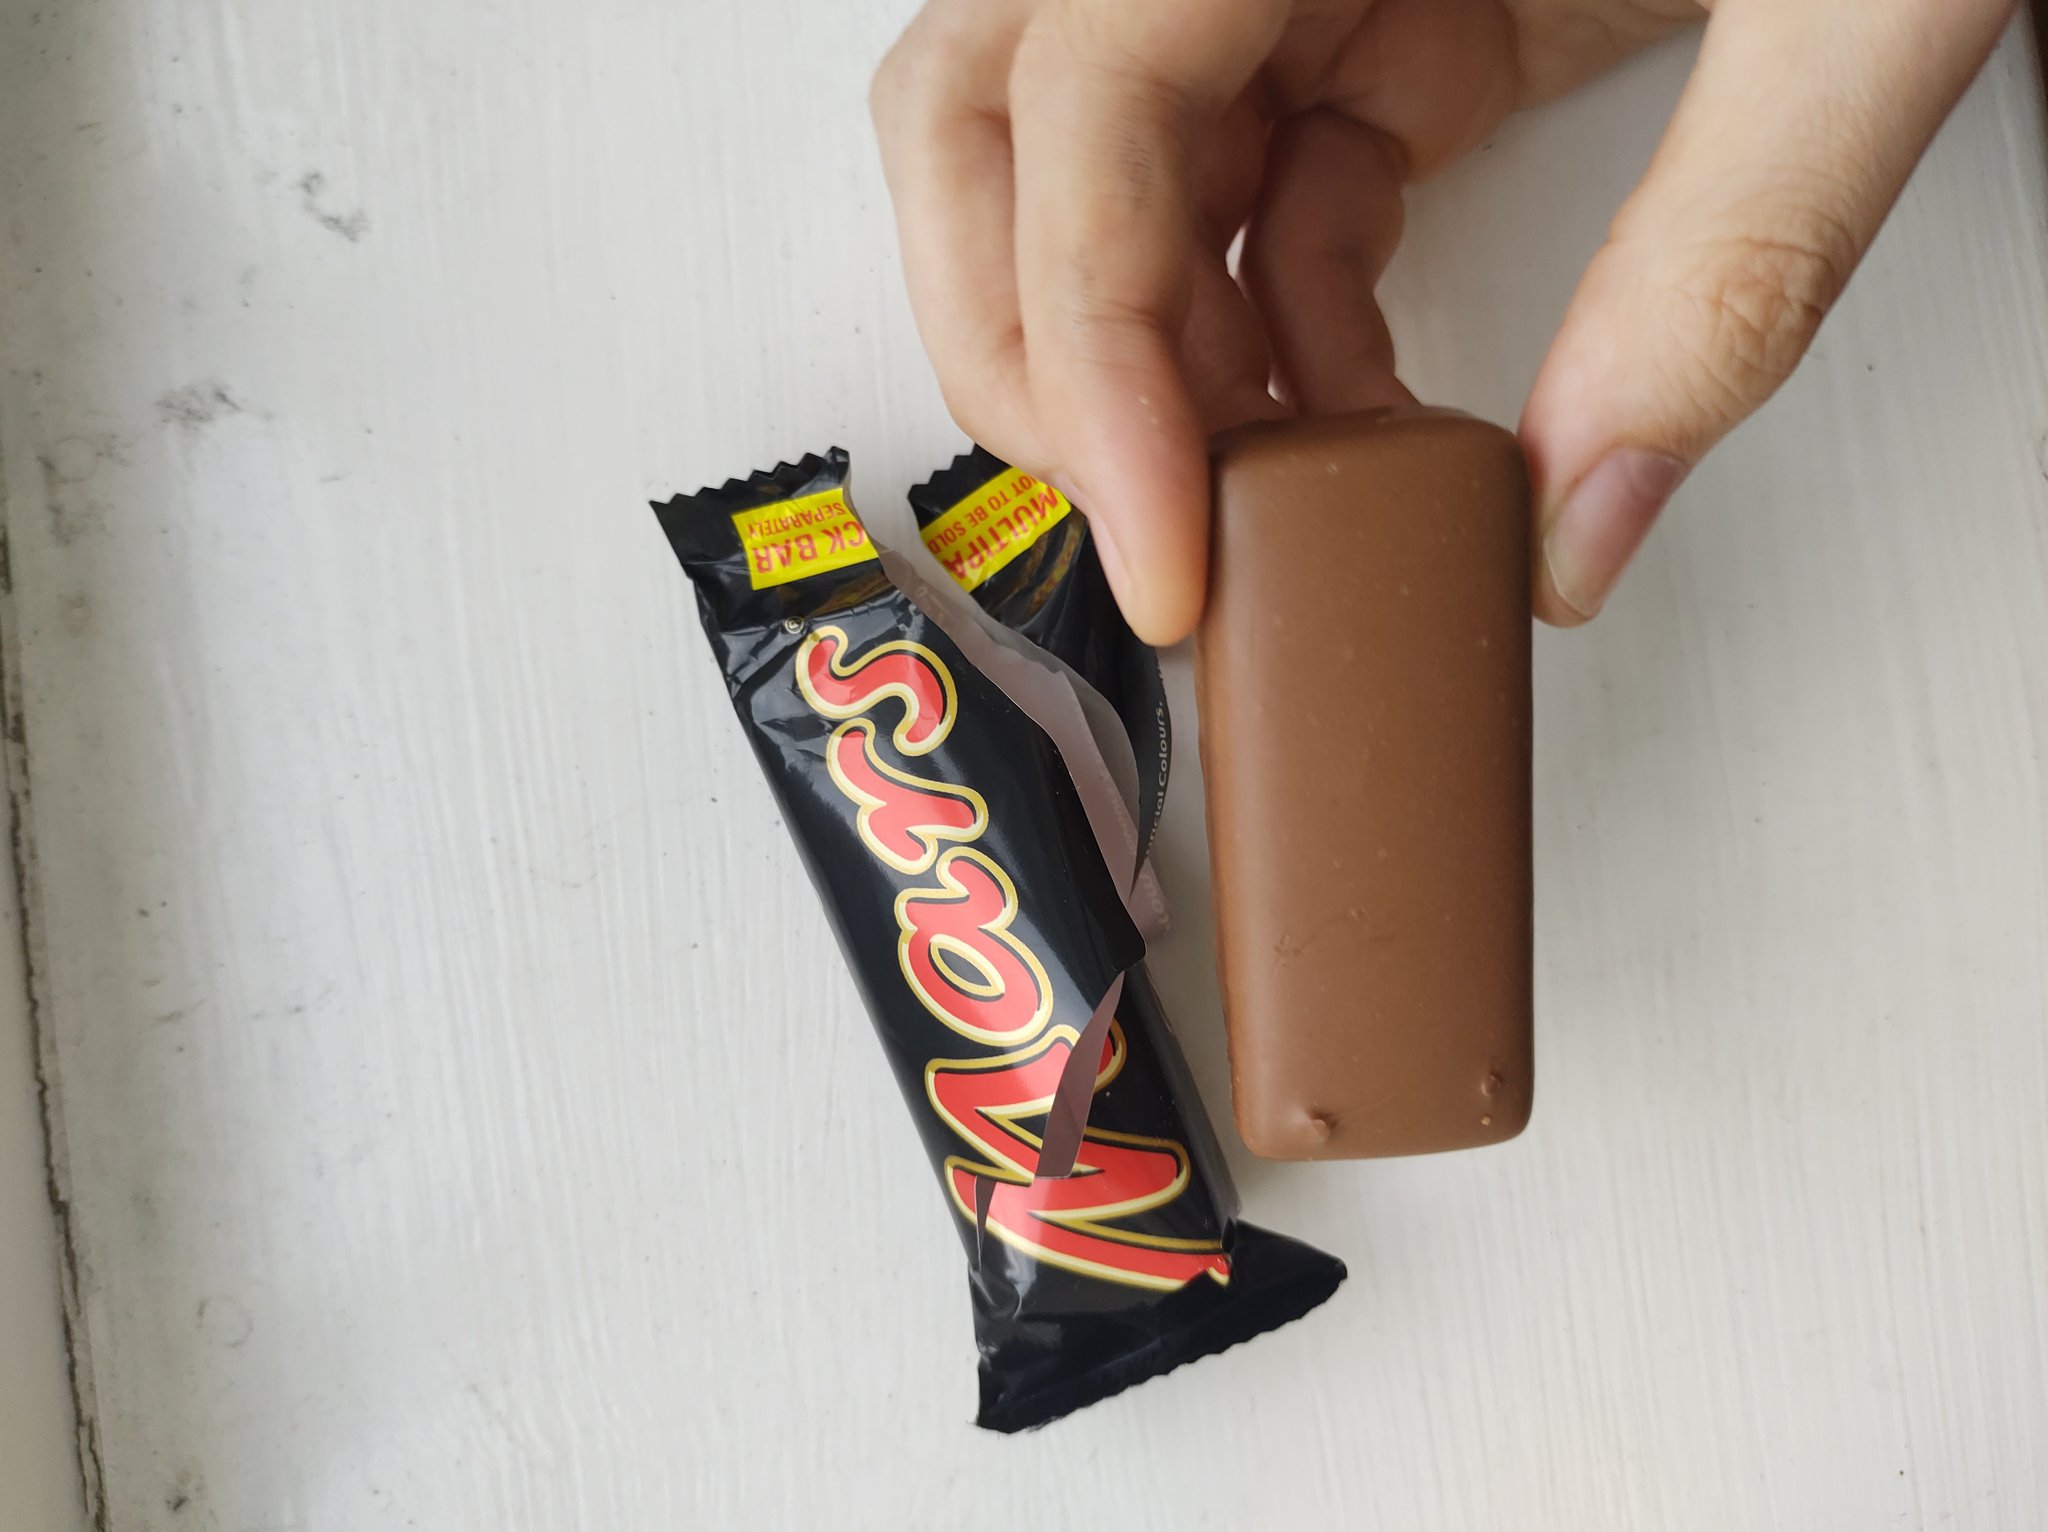 Joelle Tungus on Twitter: "They forgot to add the throbbing cock vein to my mars  bar. Day ruined. https://t.co/Tv51AvxgYV" / Twitter